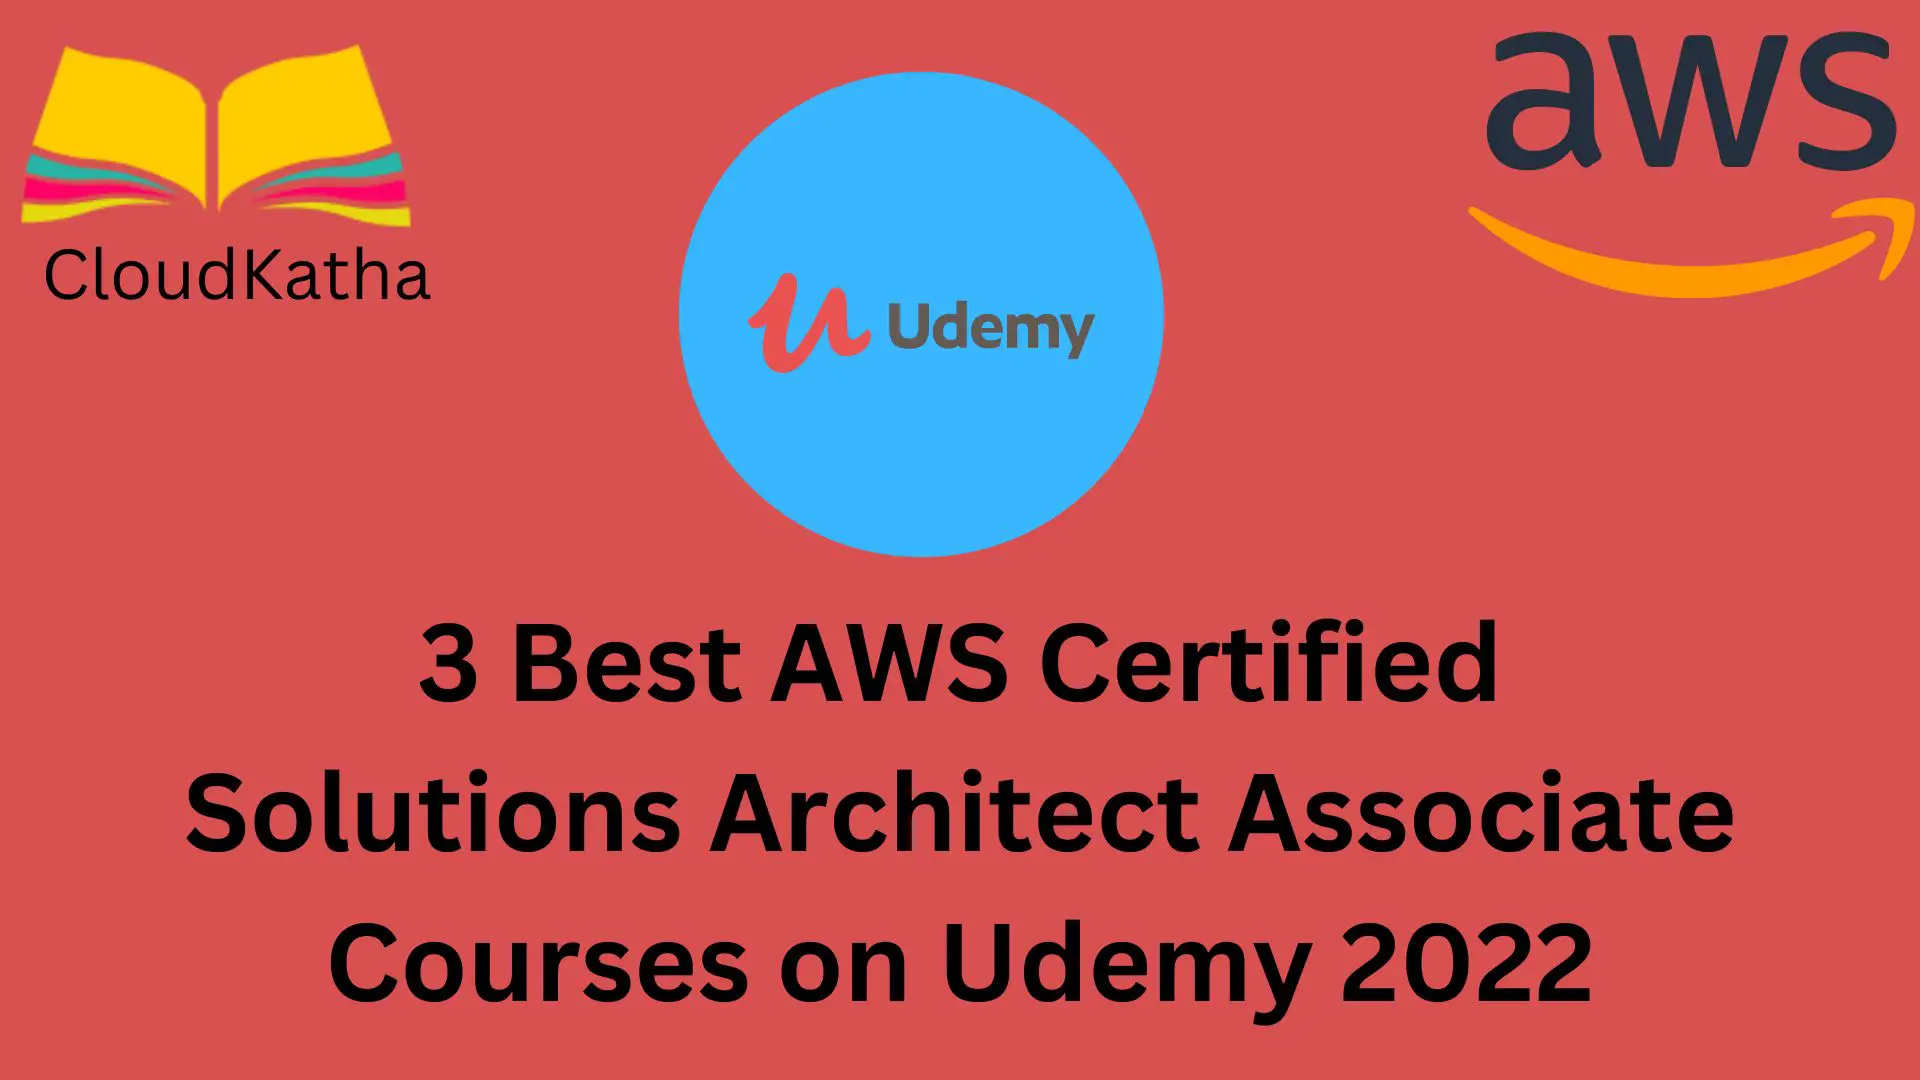 3 Best AWS Certified Solutions Architect Associate Courses on Udemy 2022